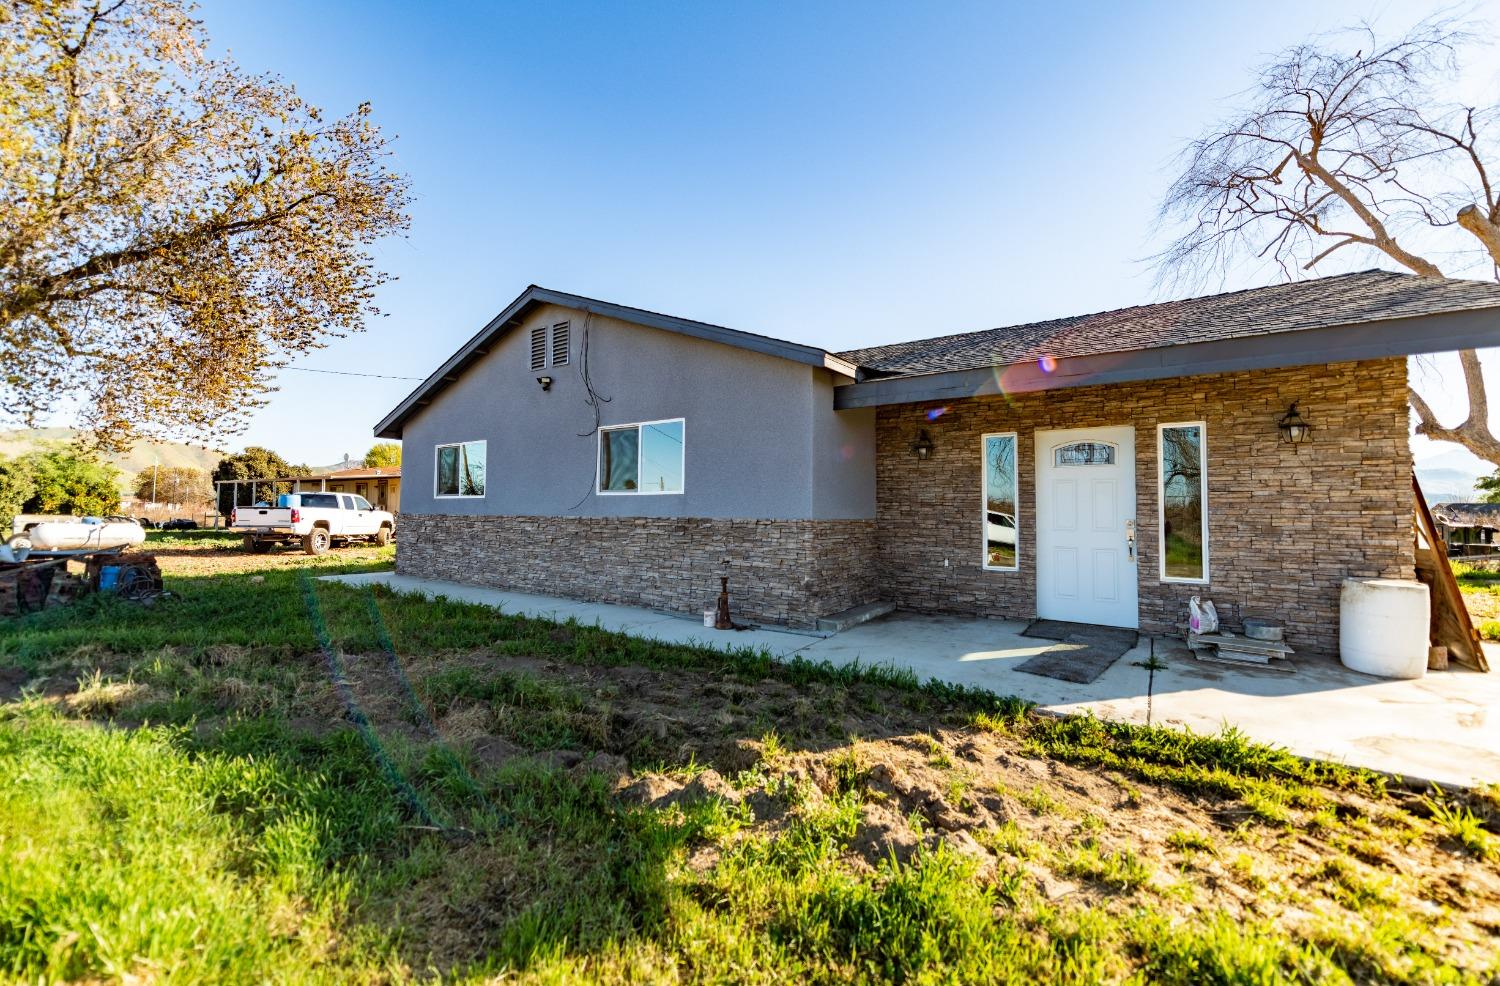 Photo of 33484 Rd 220 in Woodlake, CA